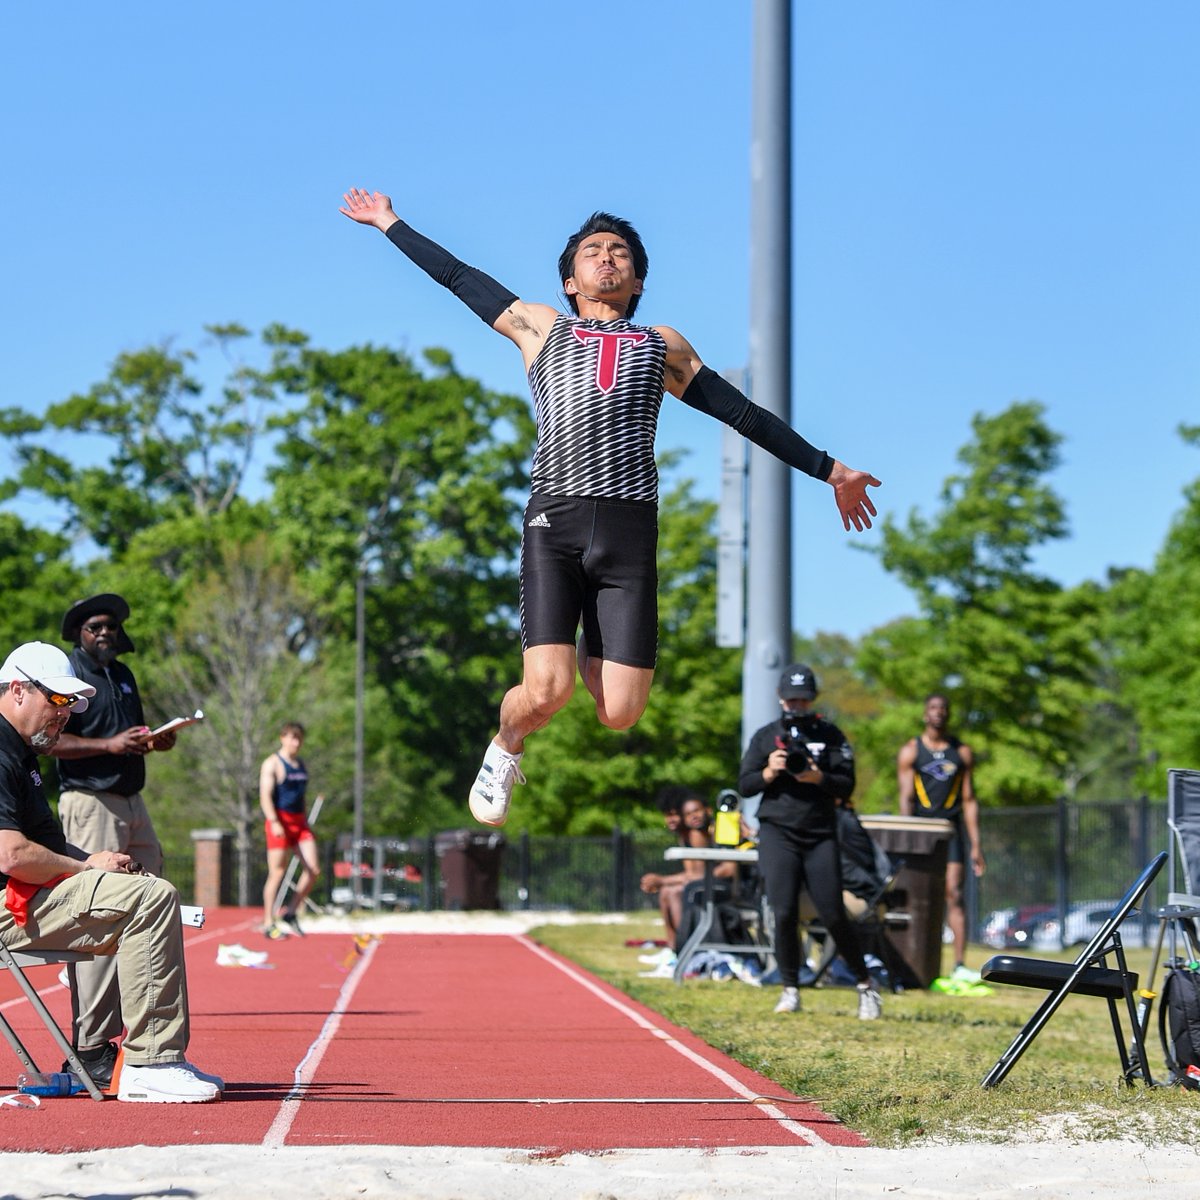 𝗧𝗮𝗸𝗶𝗻𝗴 𝗙𝗹𝗶𝗴𝗵𝘁. For the second consecutive week, Haruki Sakai takes home first place in the men's long jump with a mark of 7.33m! #OneTROY⚔️